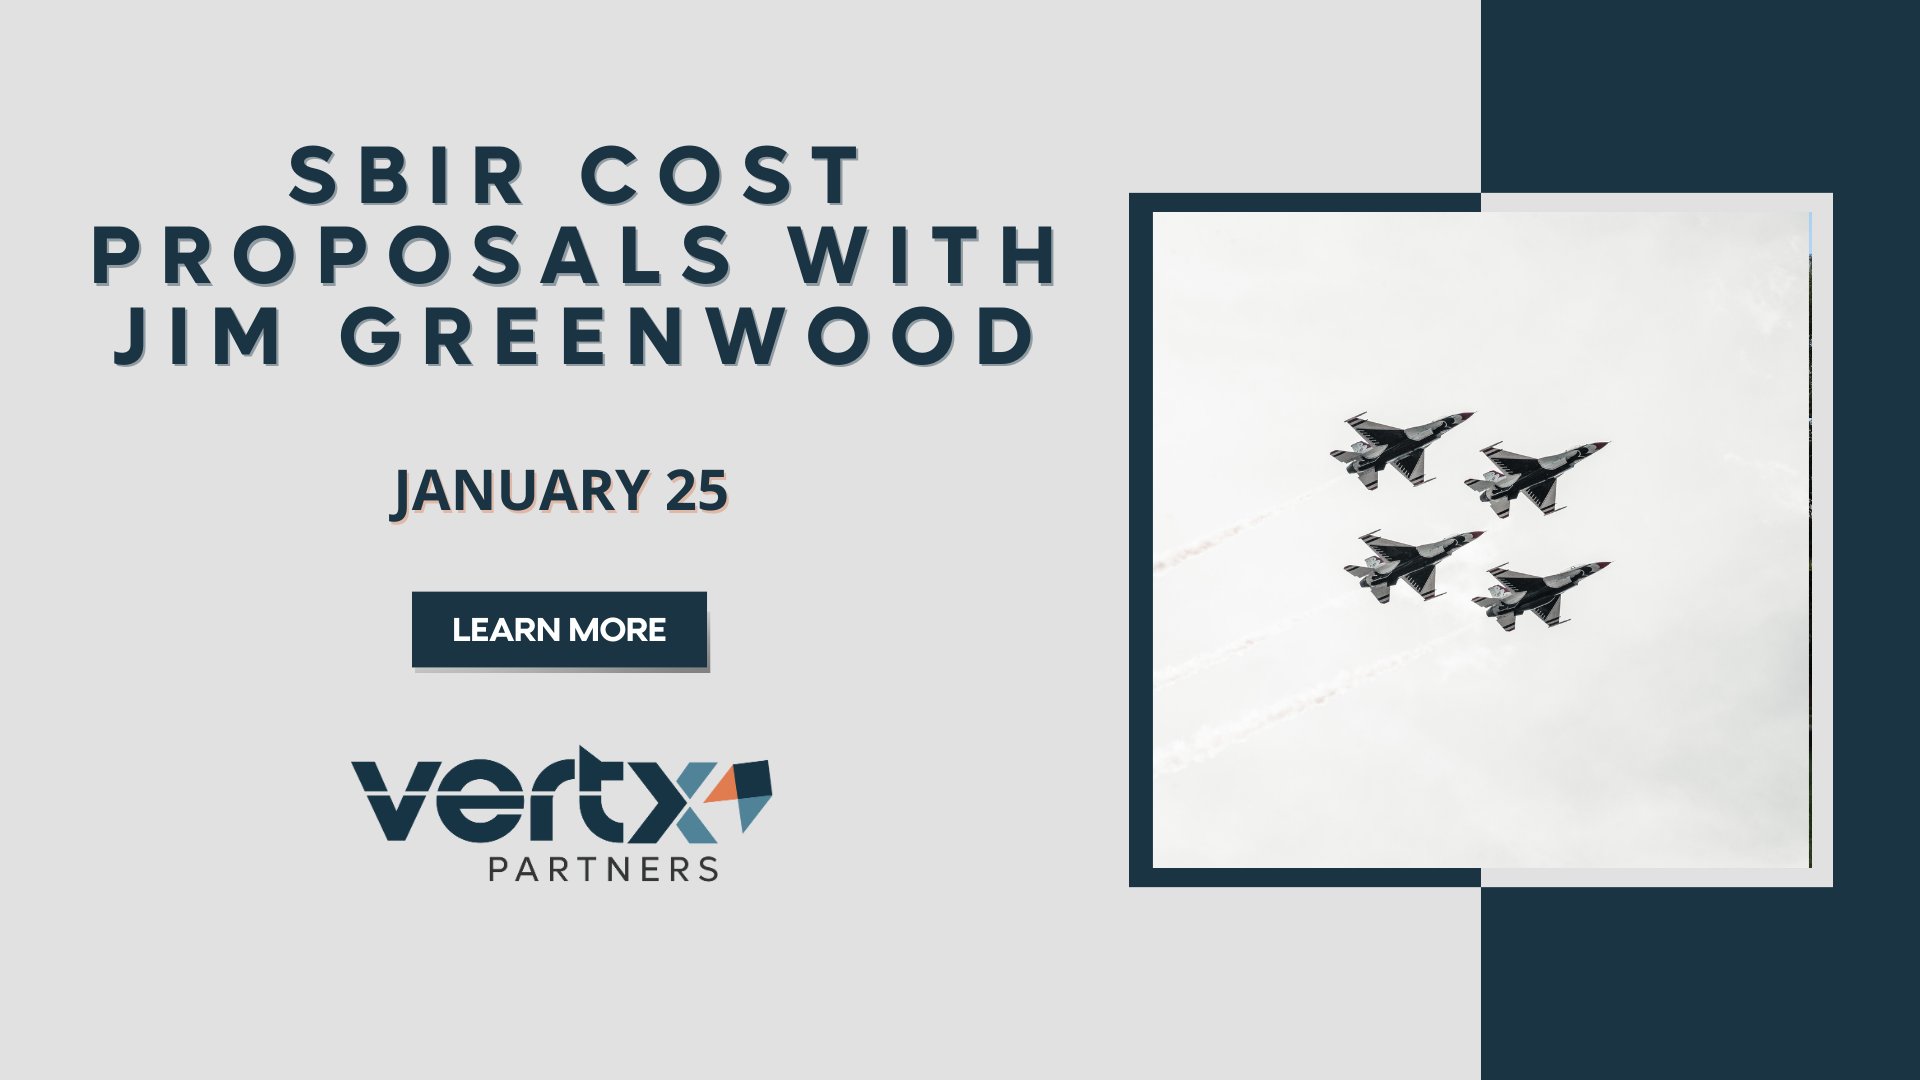 This graphic has the title "SBIR Cost Proposals with Jim Greenwood" with the date January 25th under it. There is a photo of 4 fighter jets in the sky with lots of clouds behind it, that the sky looks white. The image is to the right of the title and the date.